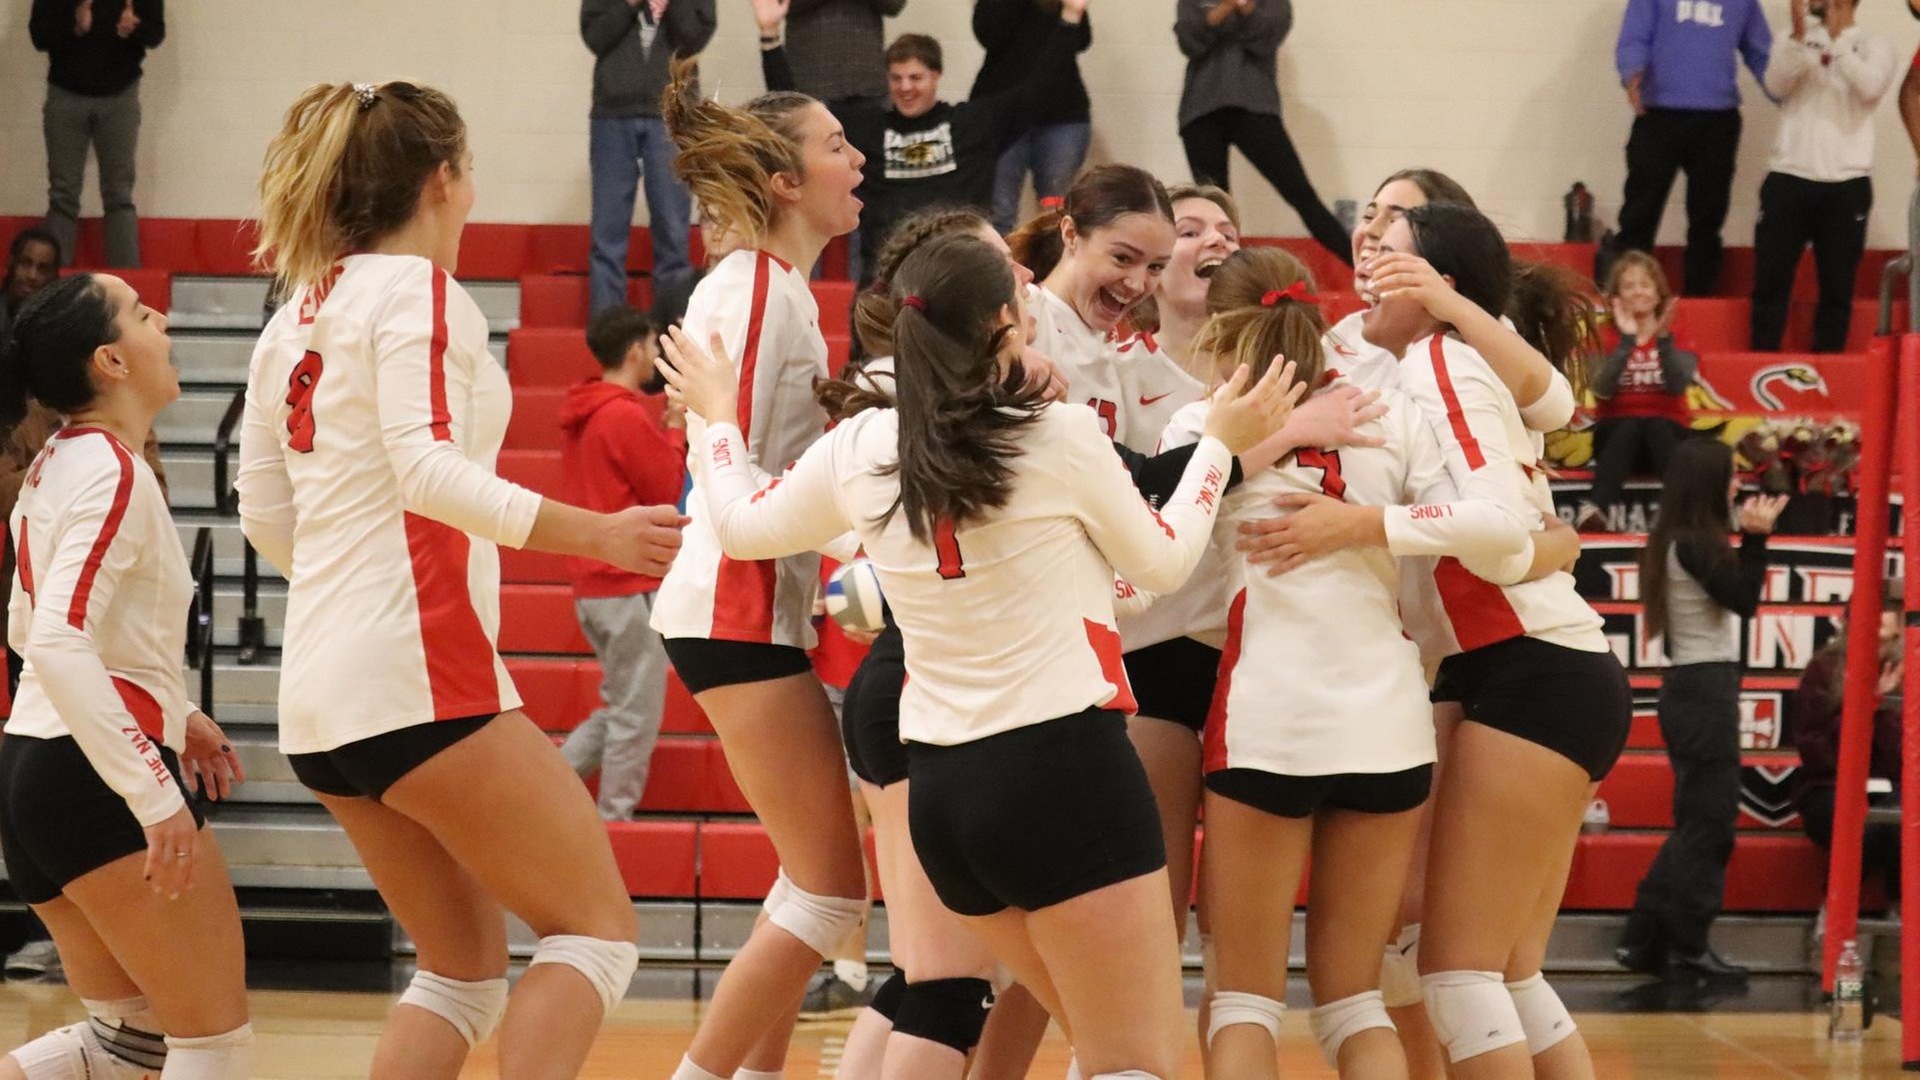 No. 1 Seed Women’s Volleyball Tops No. 4 Seed SUNY Delhi in NAC West Semifinals, 3-0